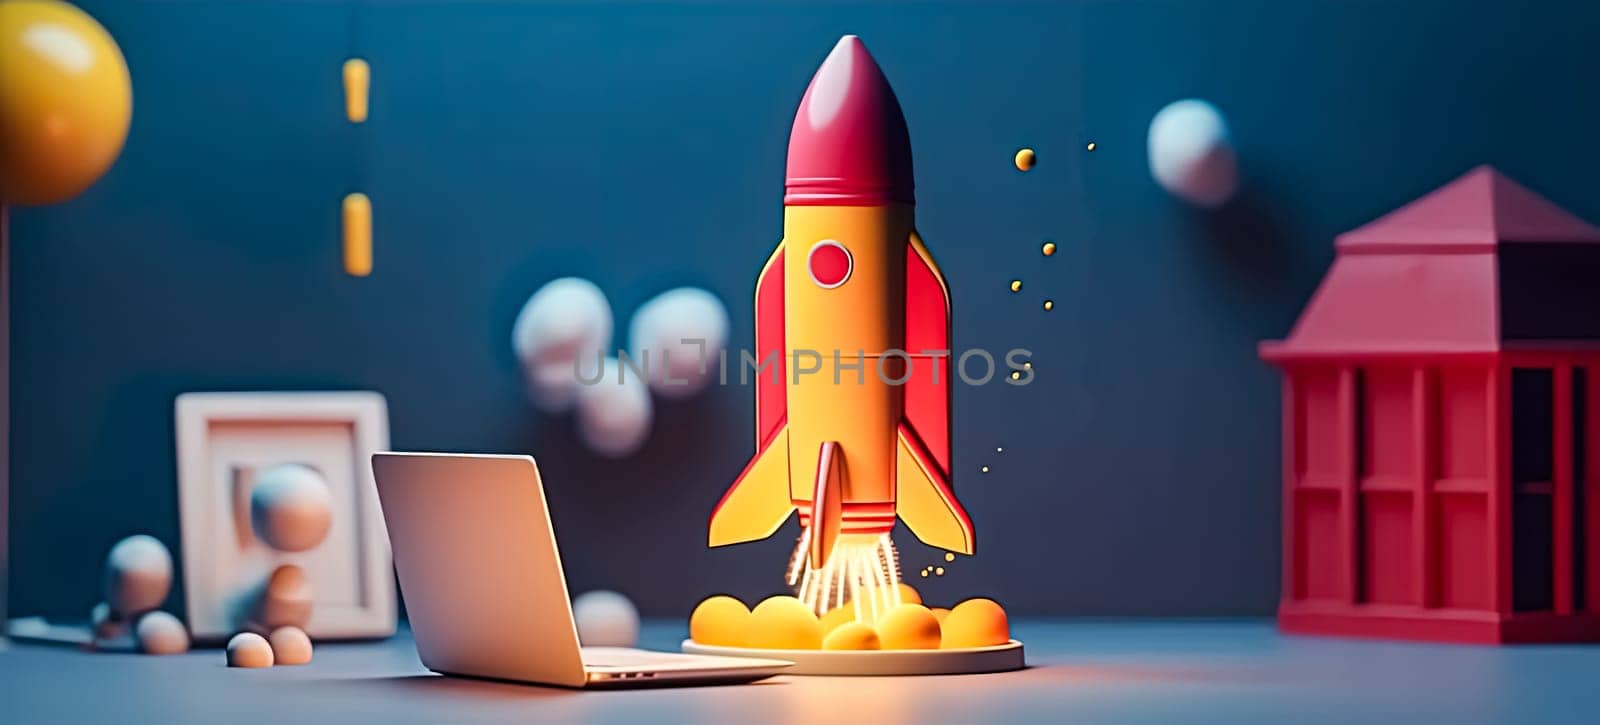 Rocket launch ship business product concept illustration. by Alla_Morozova93